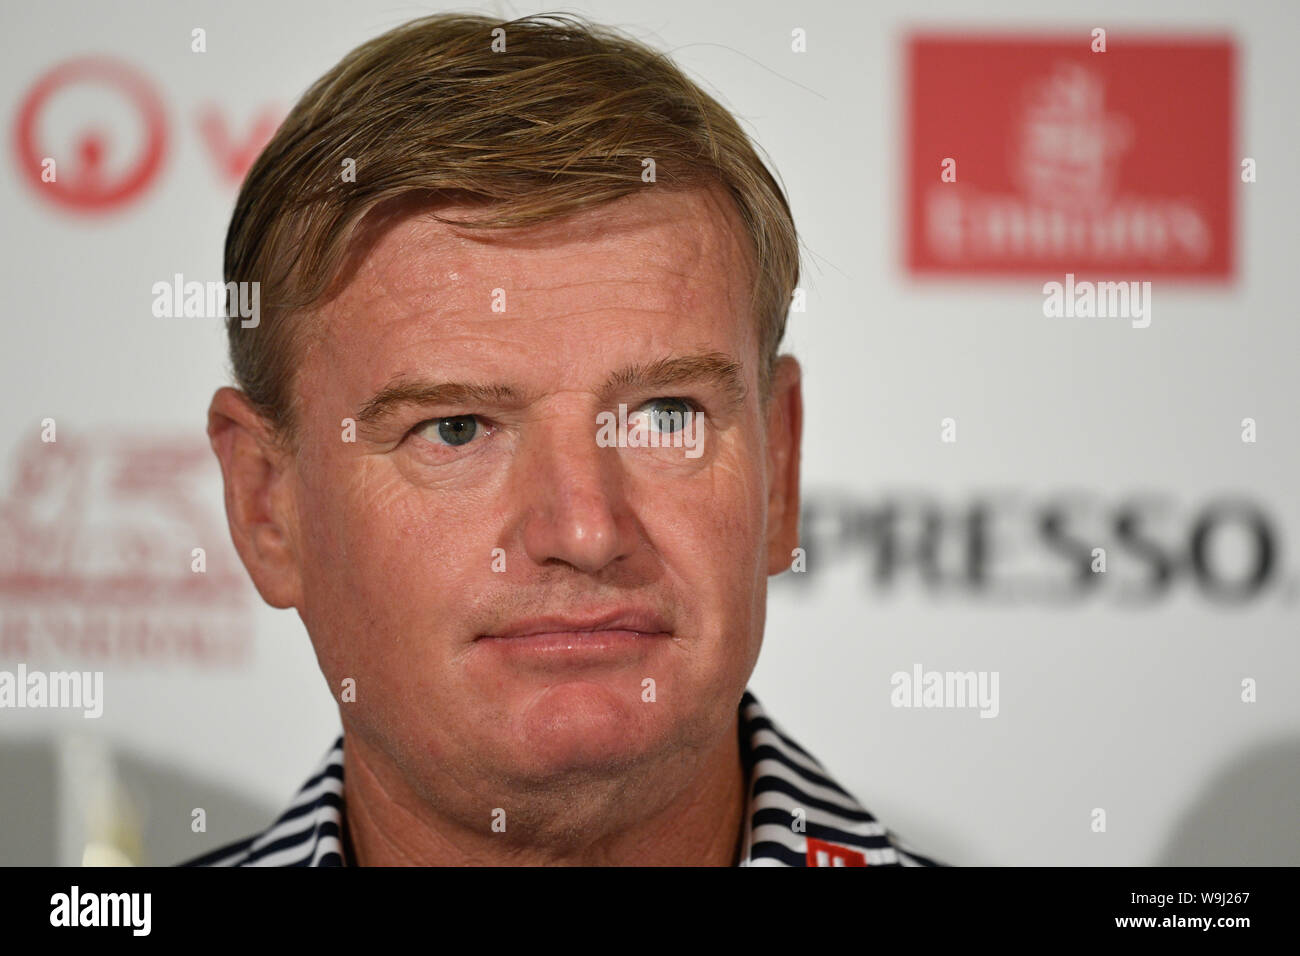 Golf player Ernie Els speaks during the press conference prior to D+D REAL CZECH MASTERS 2019 golf tournament of European Tour in Prague, Czech Republ Stock Photo